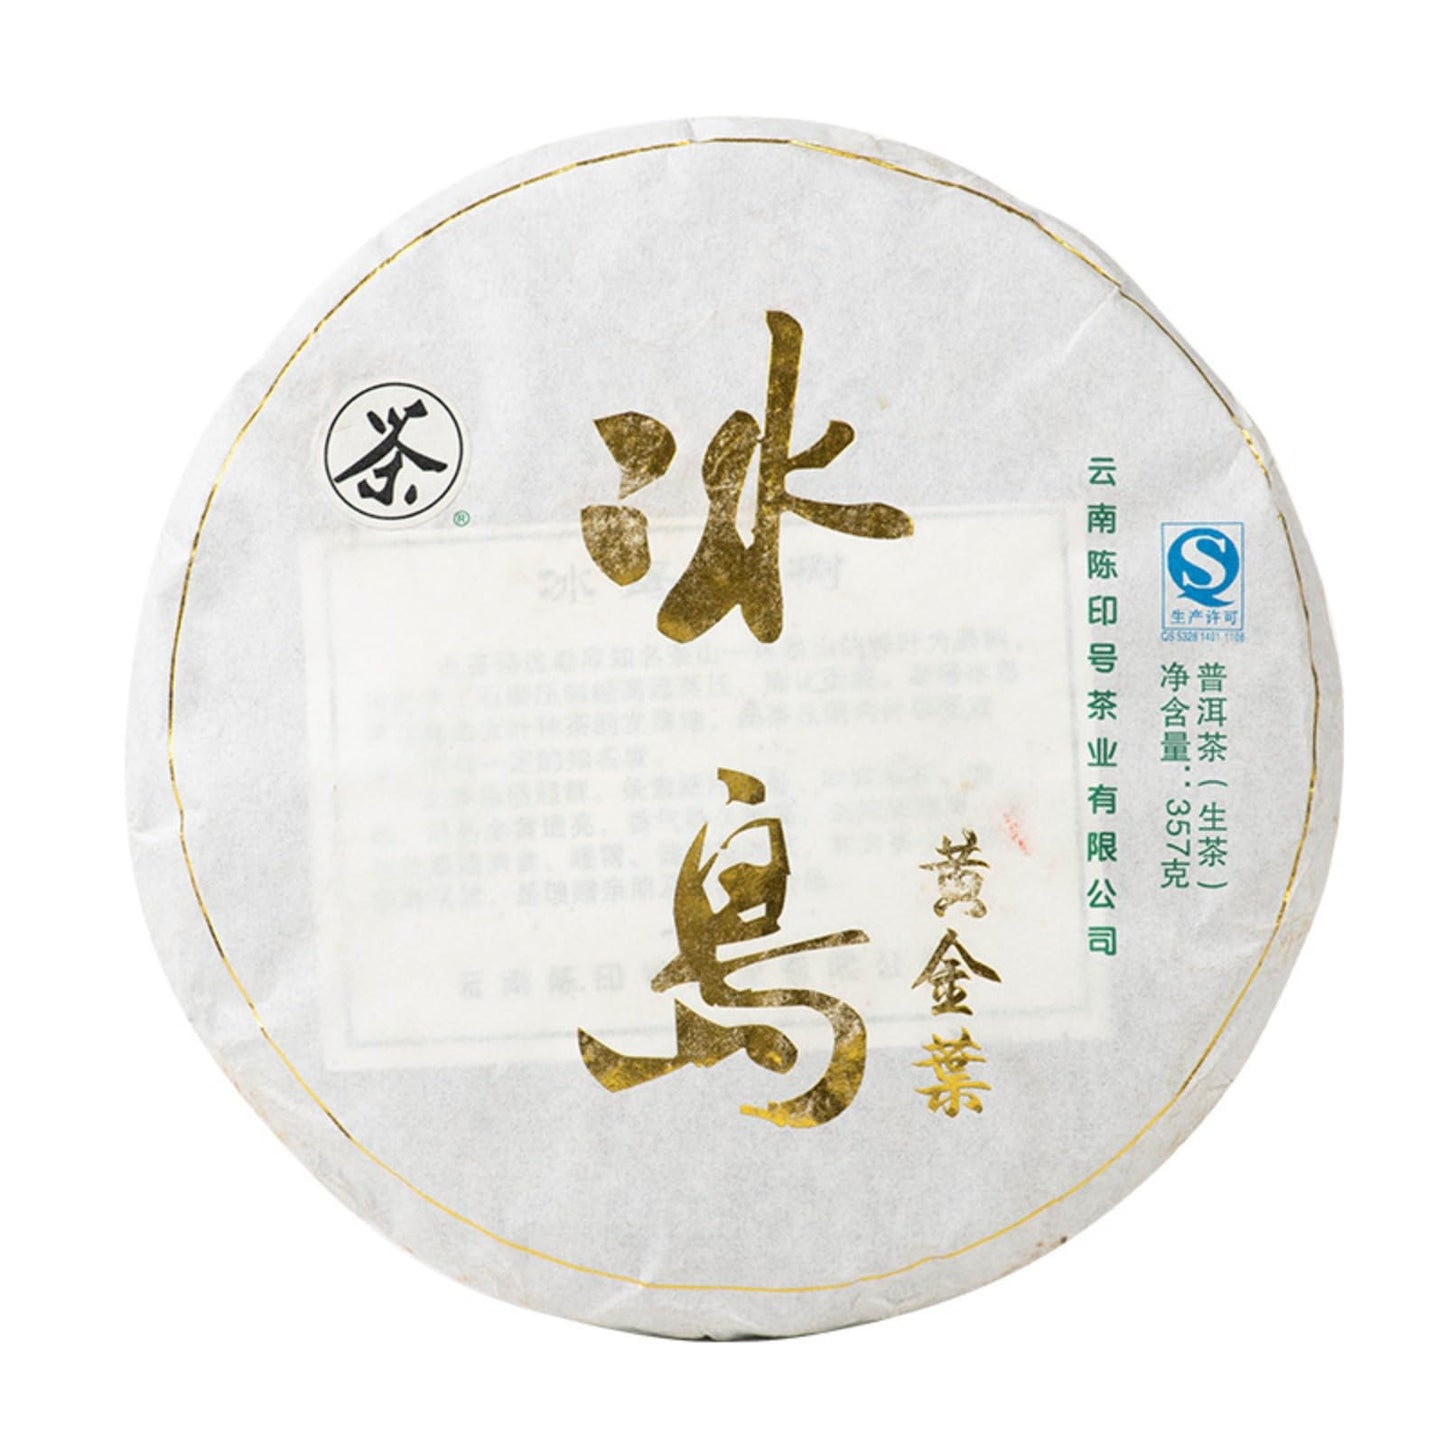 Yunnan Natural and Additive-free Iceland Gold Leaf Bright Front Spring Ancient Tree Tea Cake 357g Deliciously Smooth Raw Tea Cake Raw Puerh Tea 云南冰岛黄金叶明前春古树茶饼生茶357g